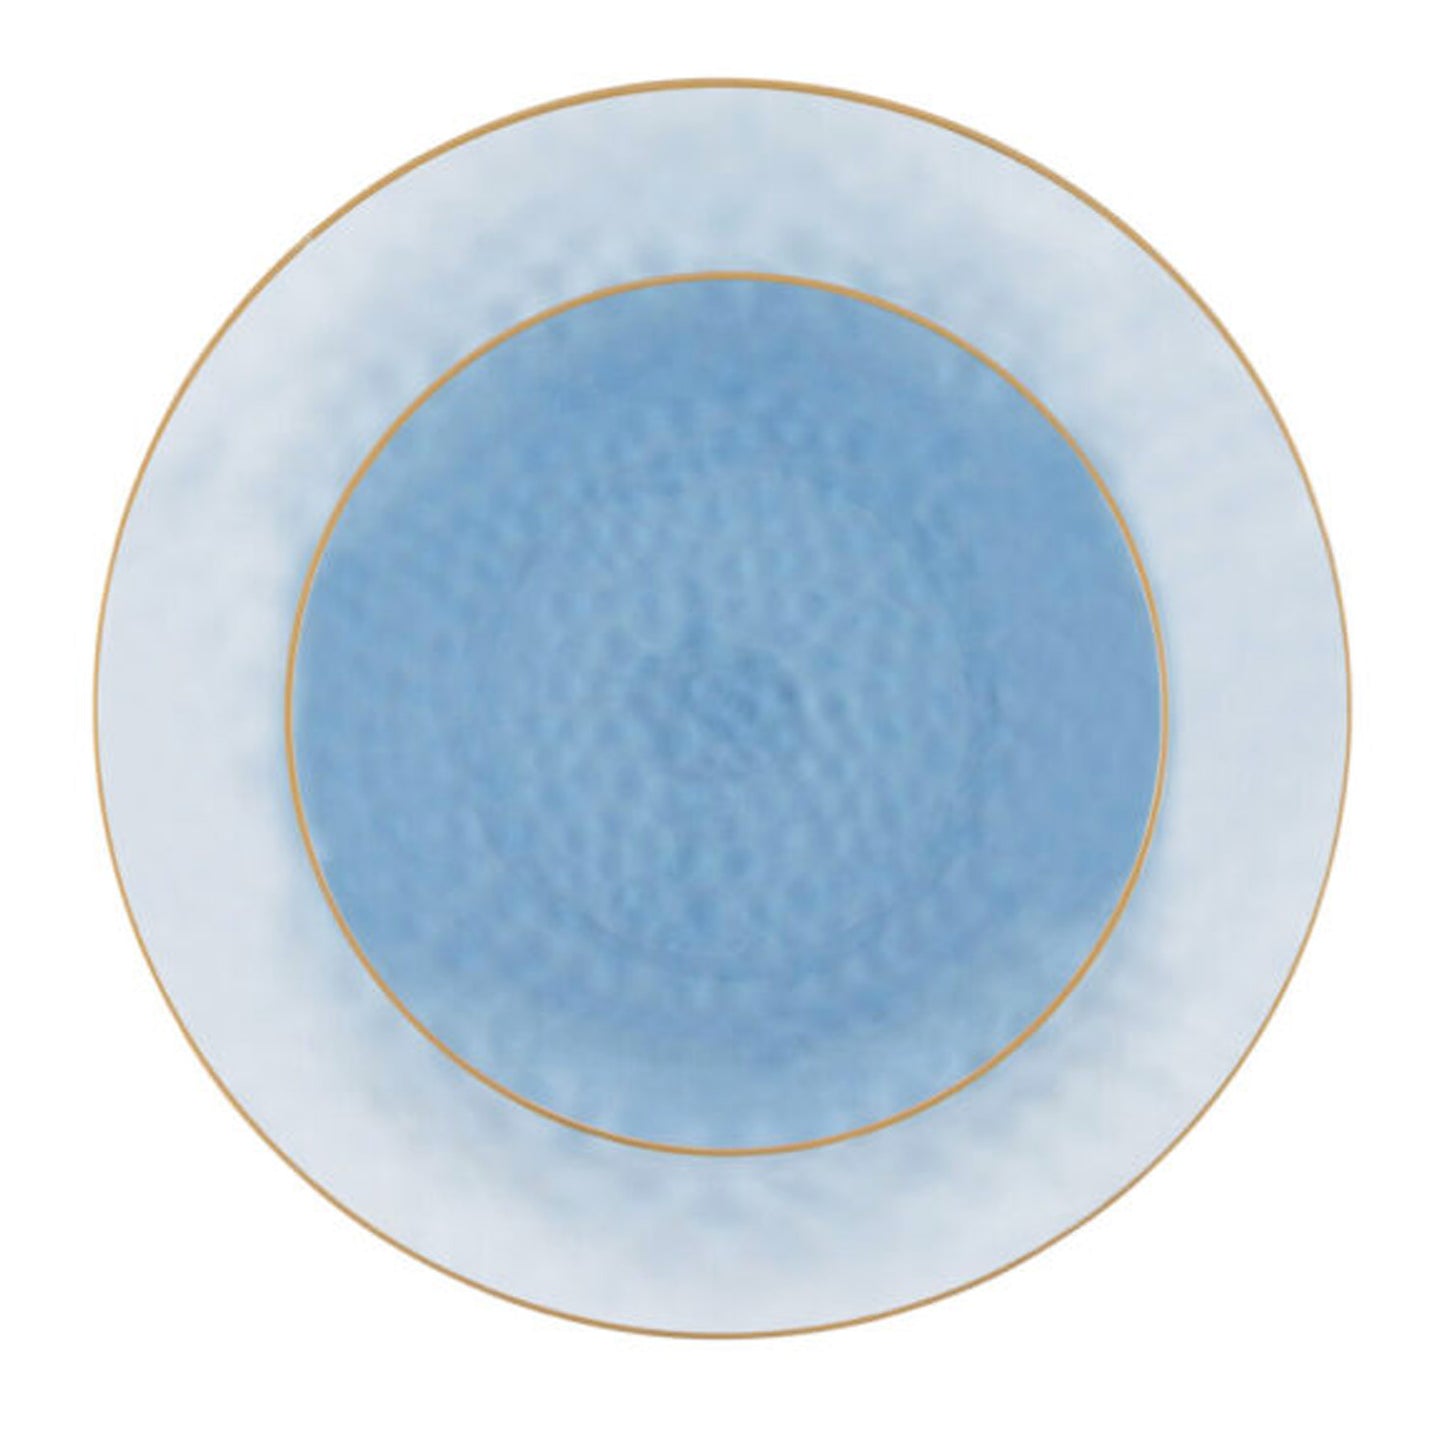 Organic Hammered Blue Gold Rim 7″ Plates Tablesettings Blue Sky   